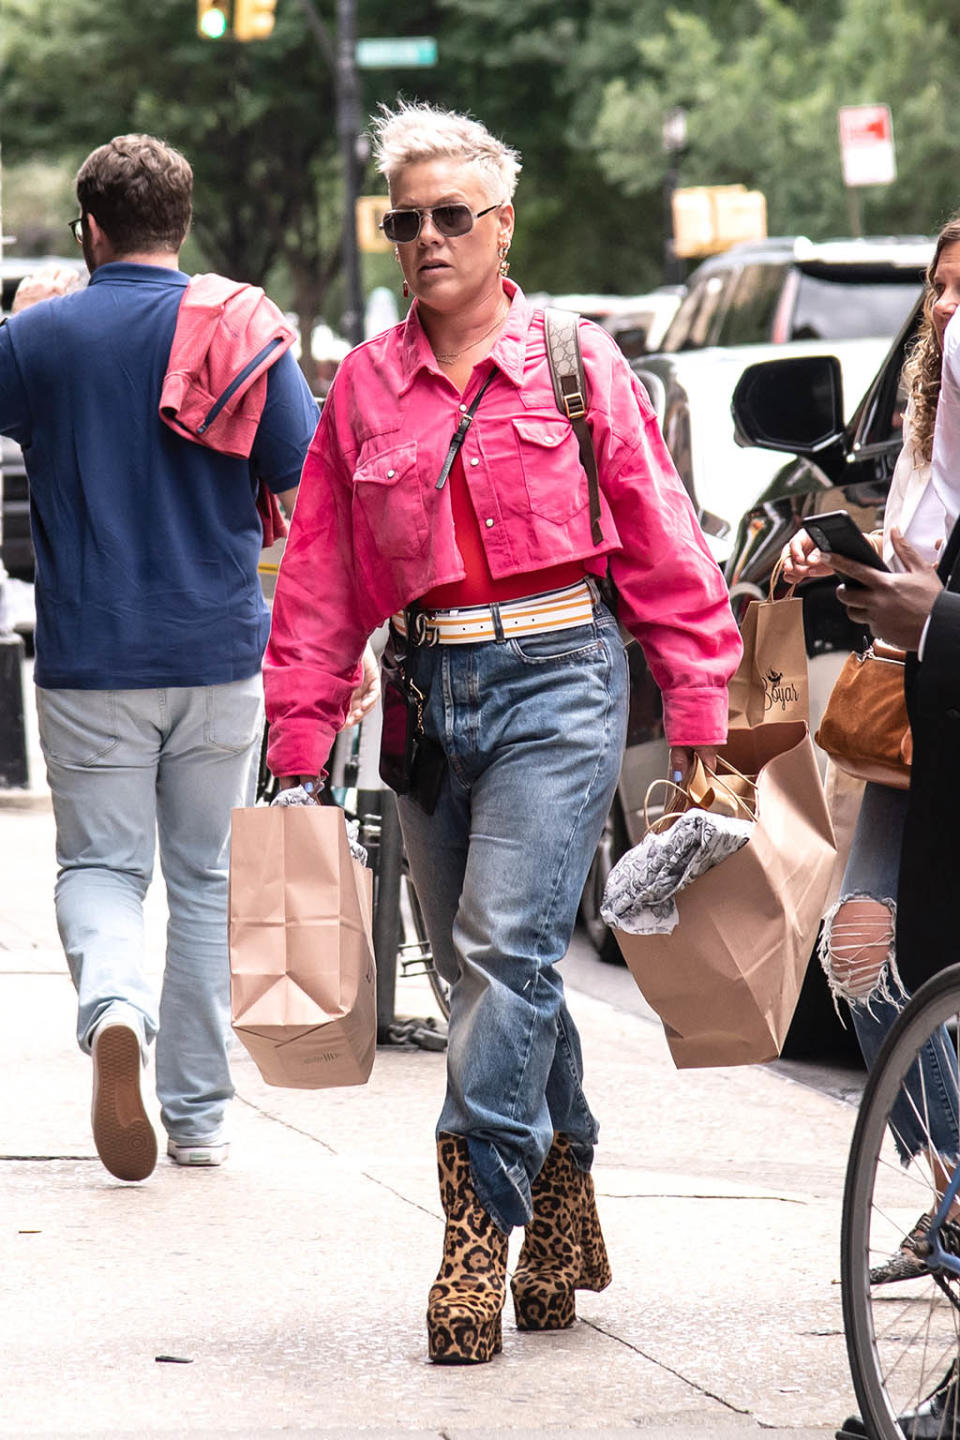 Pink spotted arriving at The Greenwich Hotel in New York City on June 23, 2022. - Credit: MEGA